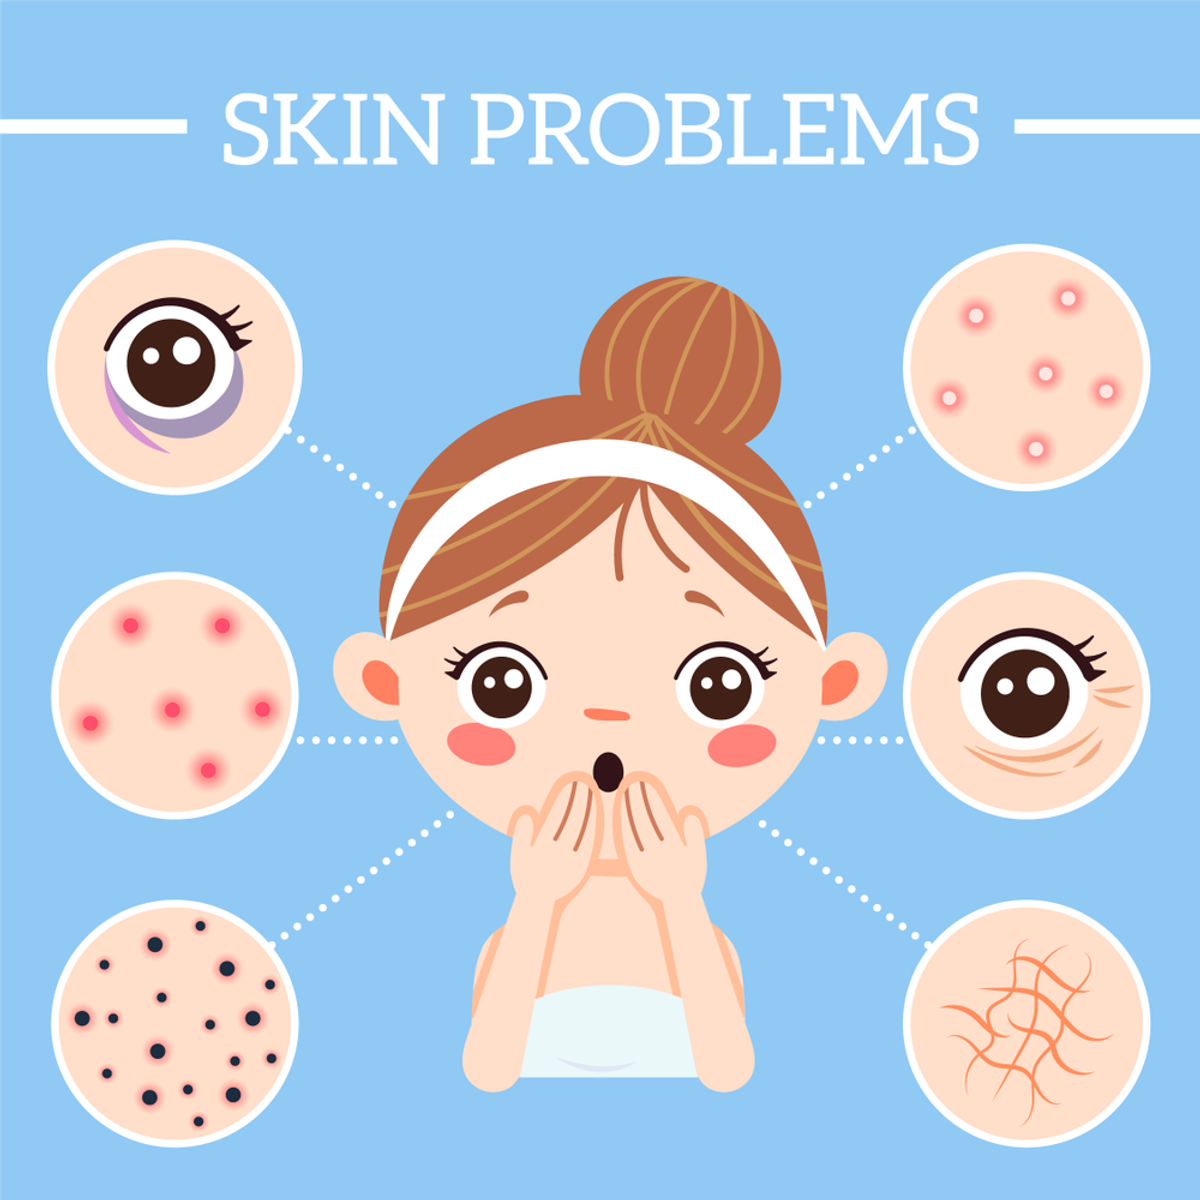 What Your Skin is Telling you?